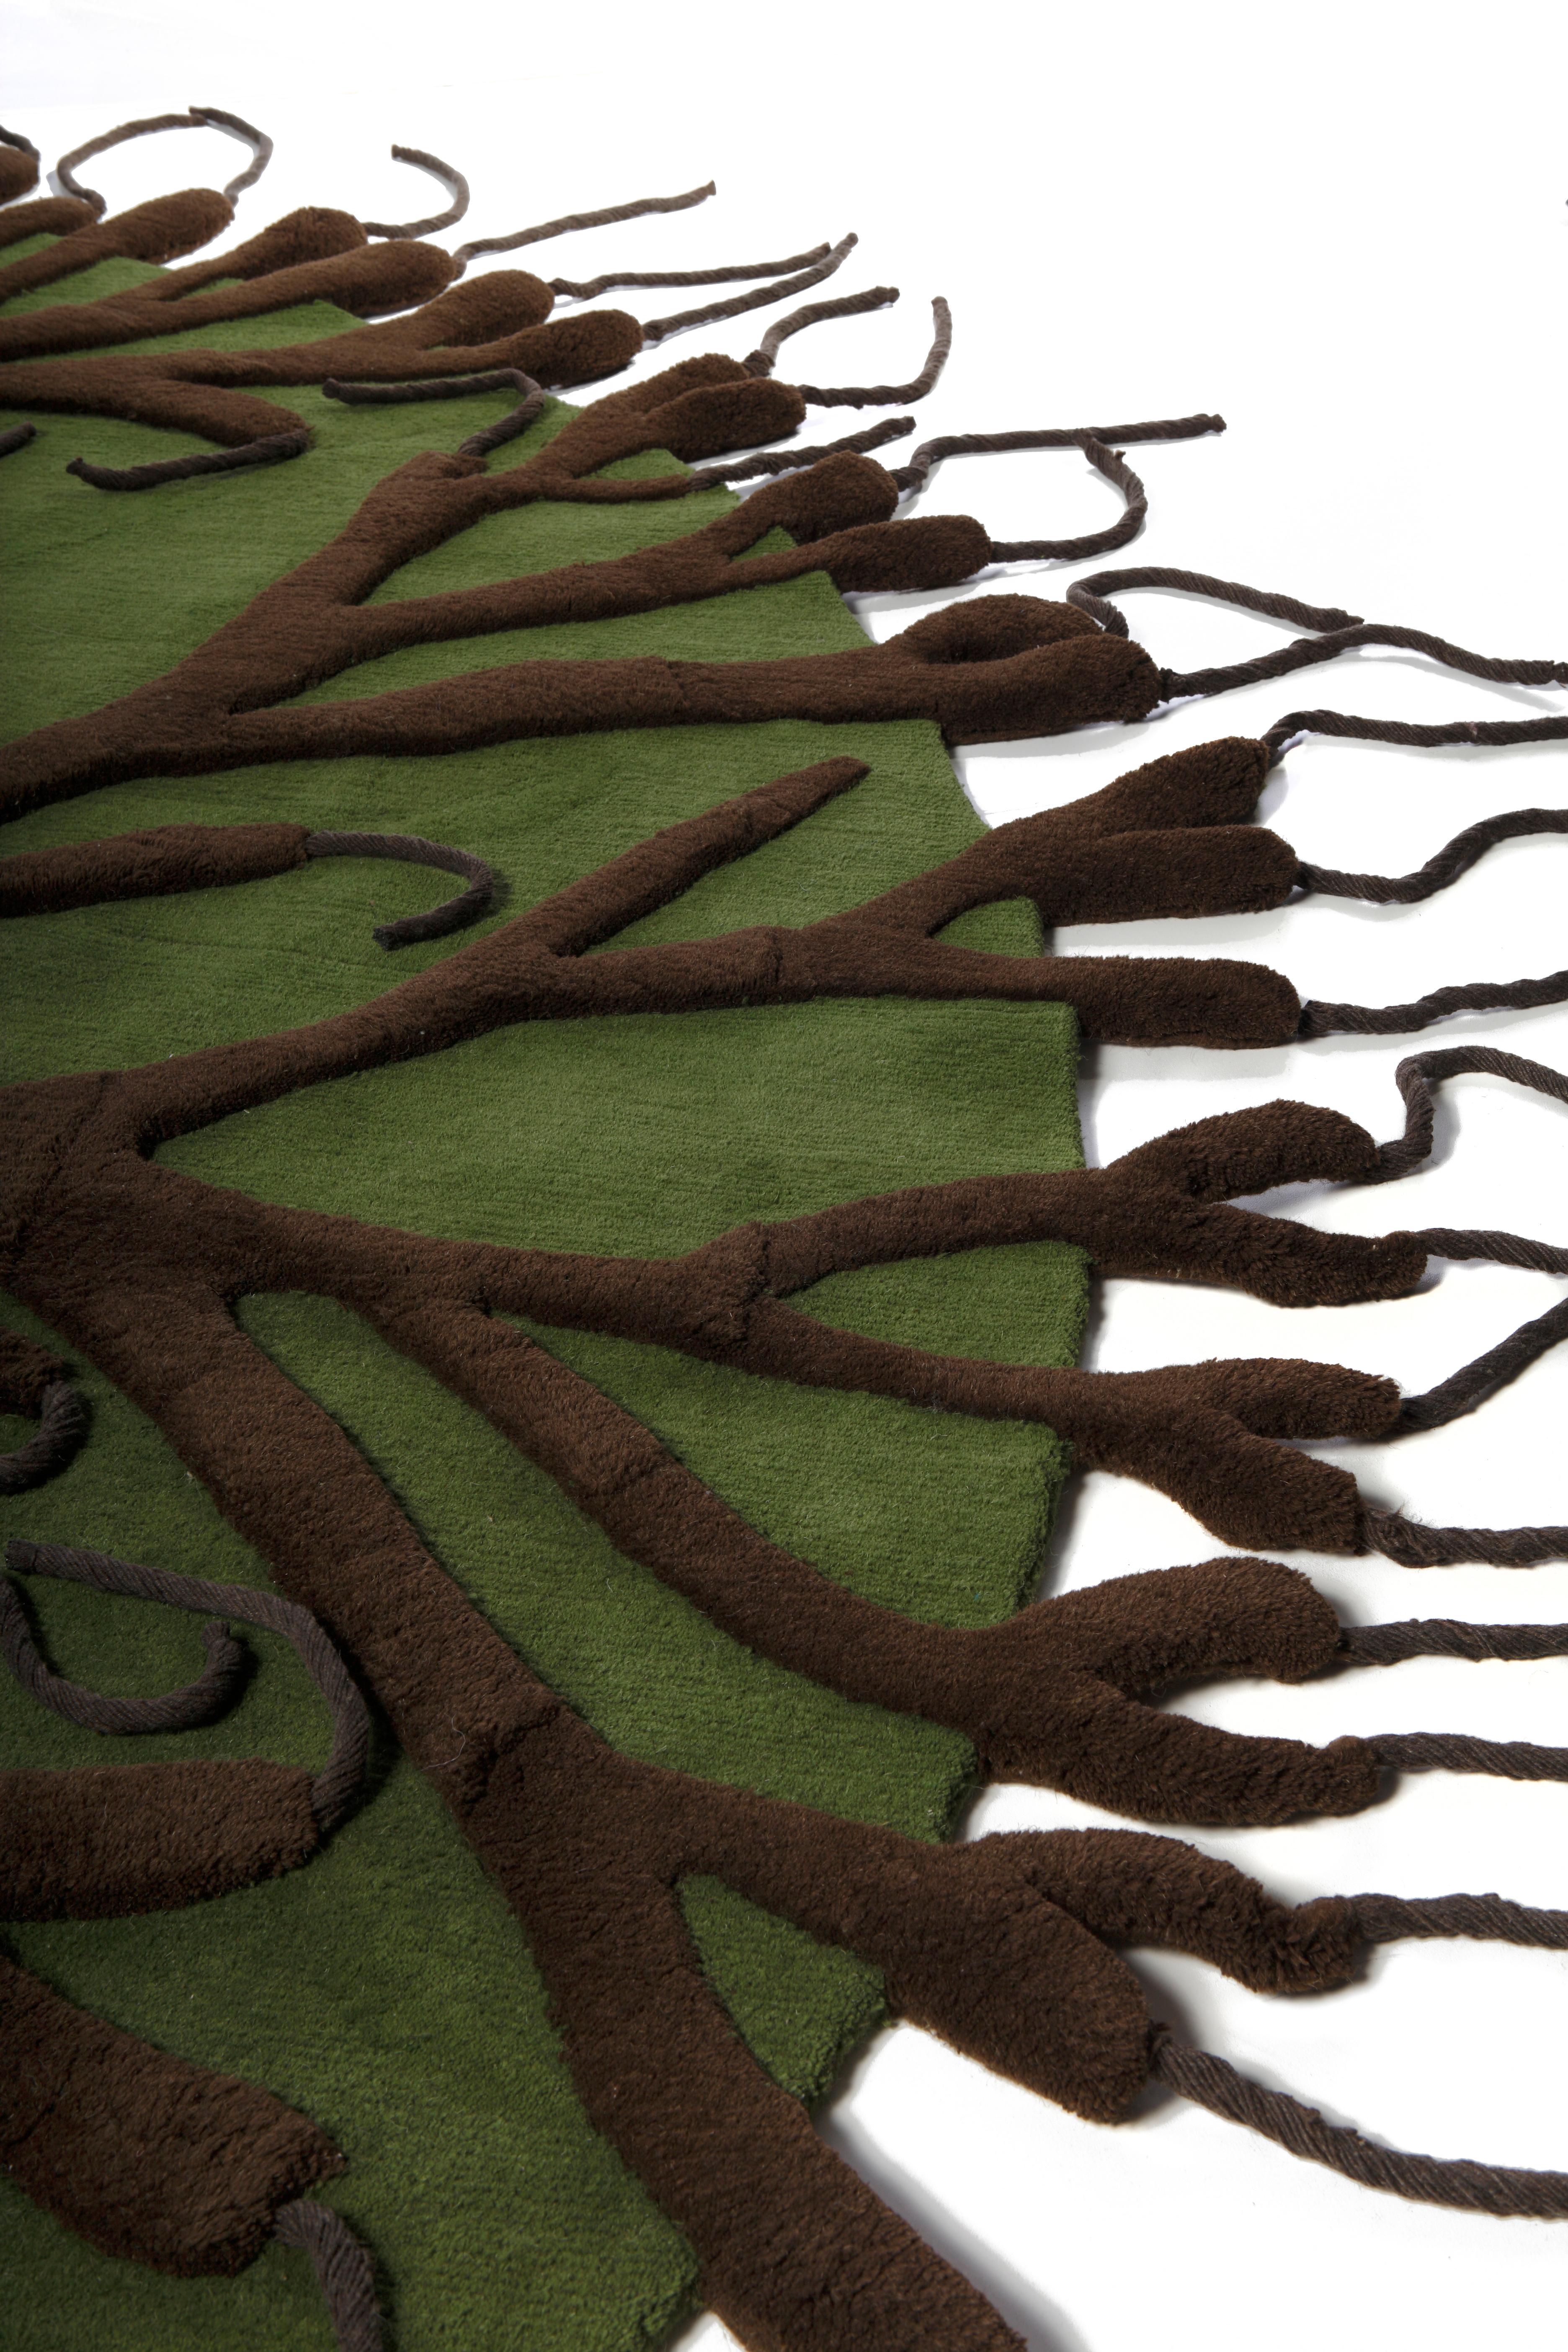 The french designer Matali Crasset has collaborated for the first time with contemporary rug company Nodus in 2011 to create ‘Roots’.
The woolen rug has four levels of height giving it three-dimensional quality that resembles the root system of a